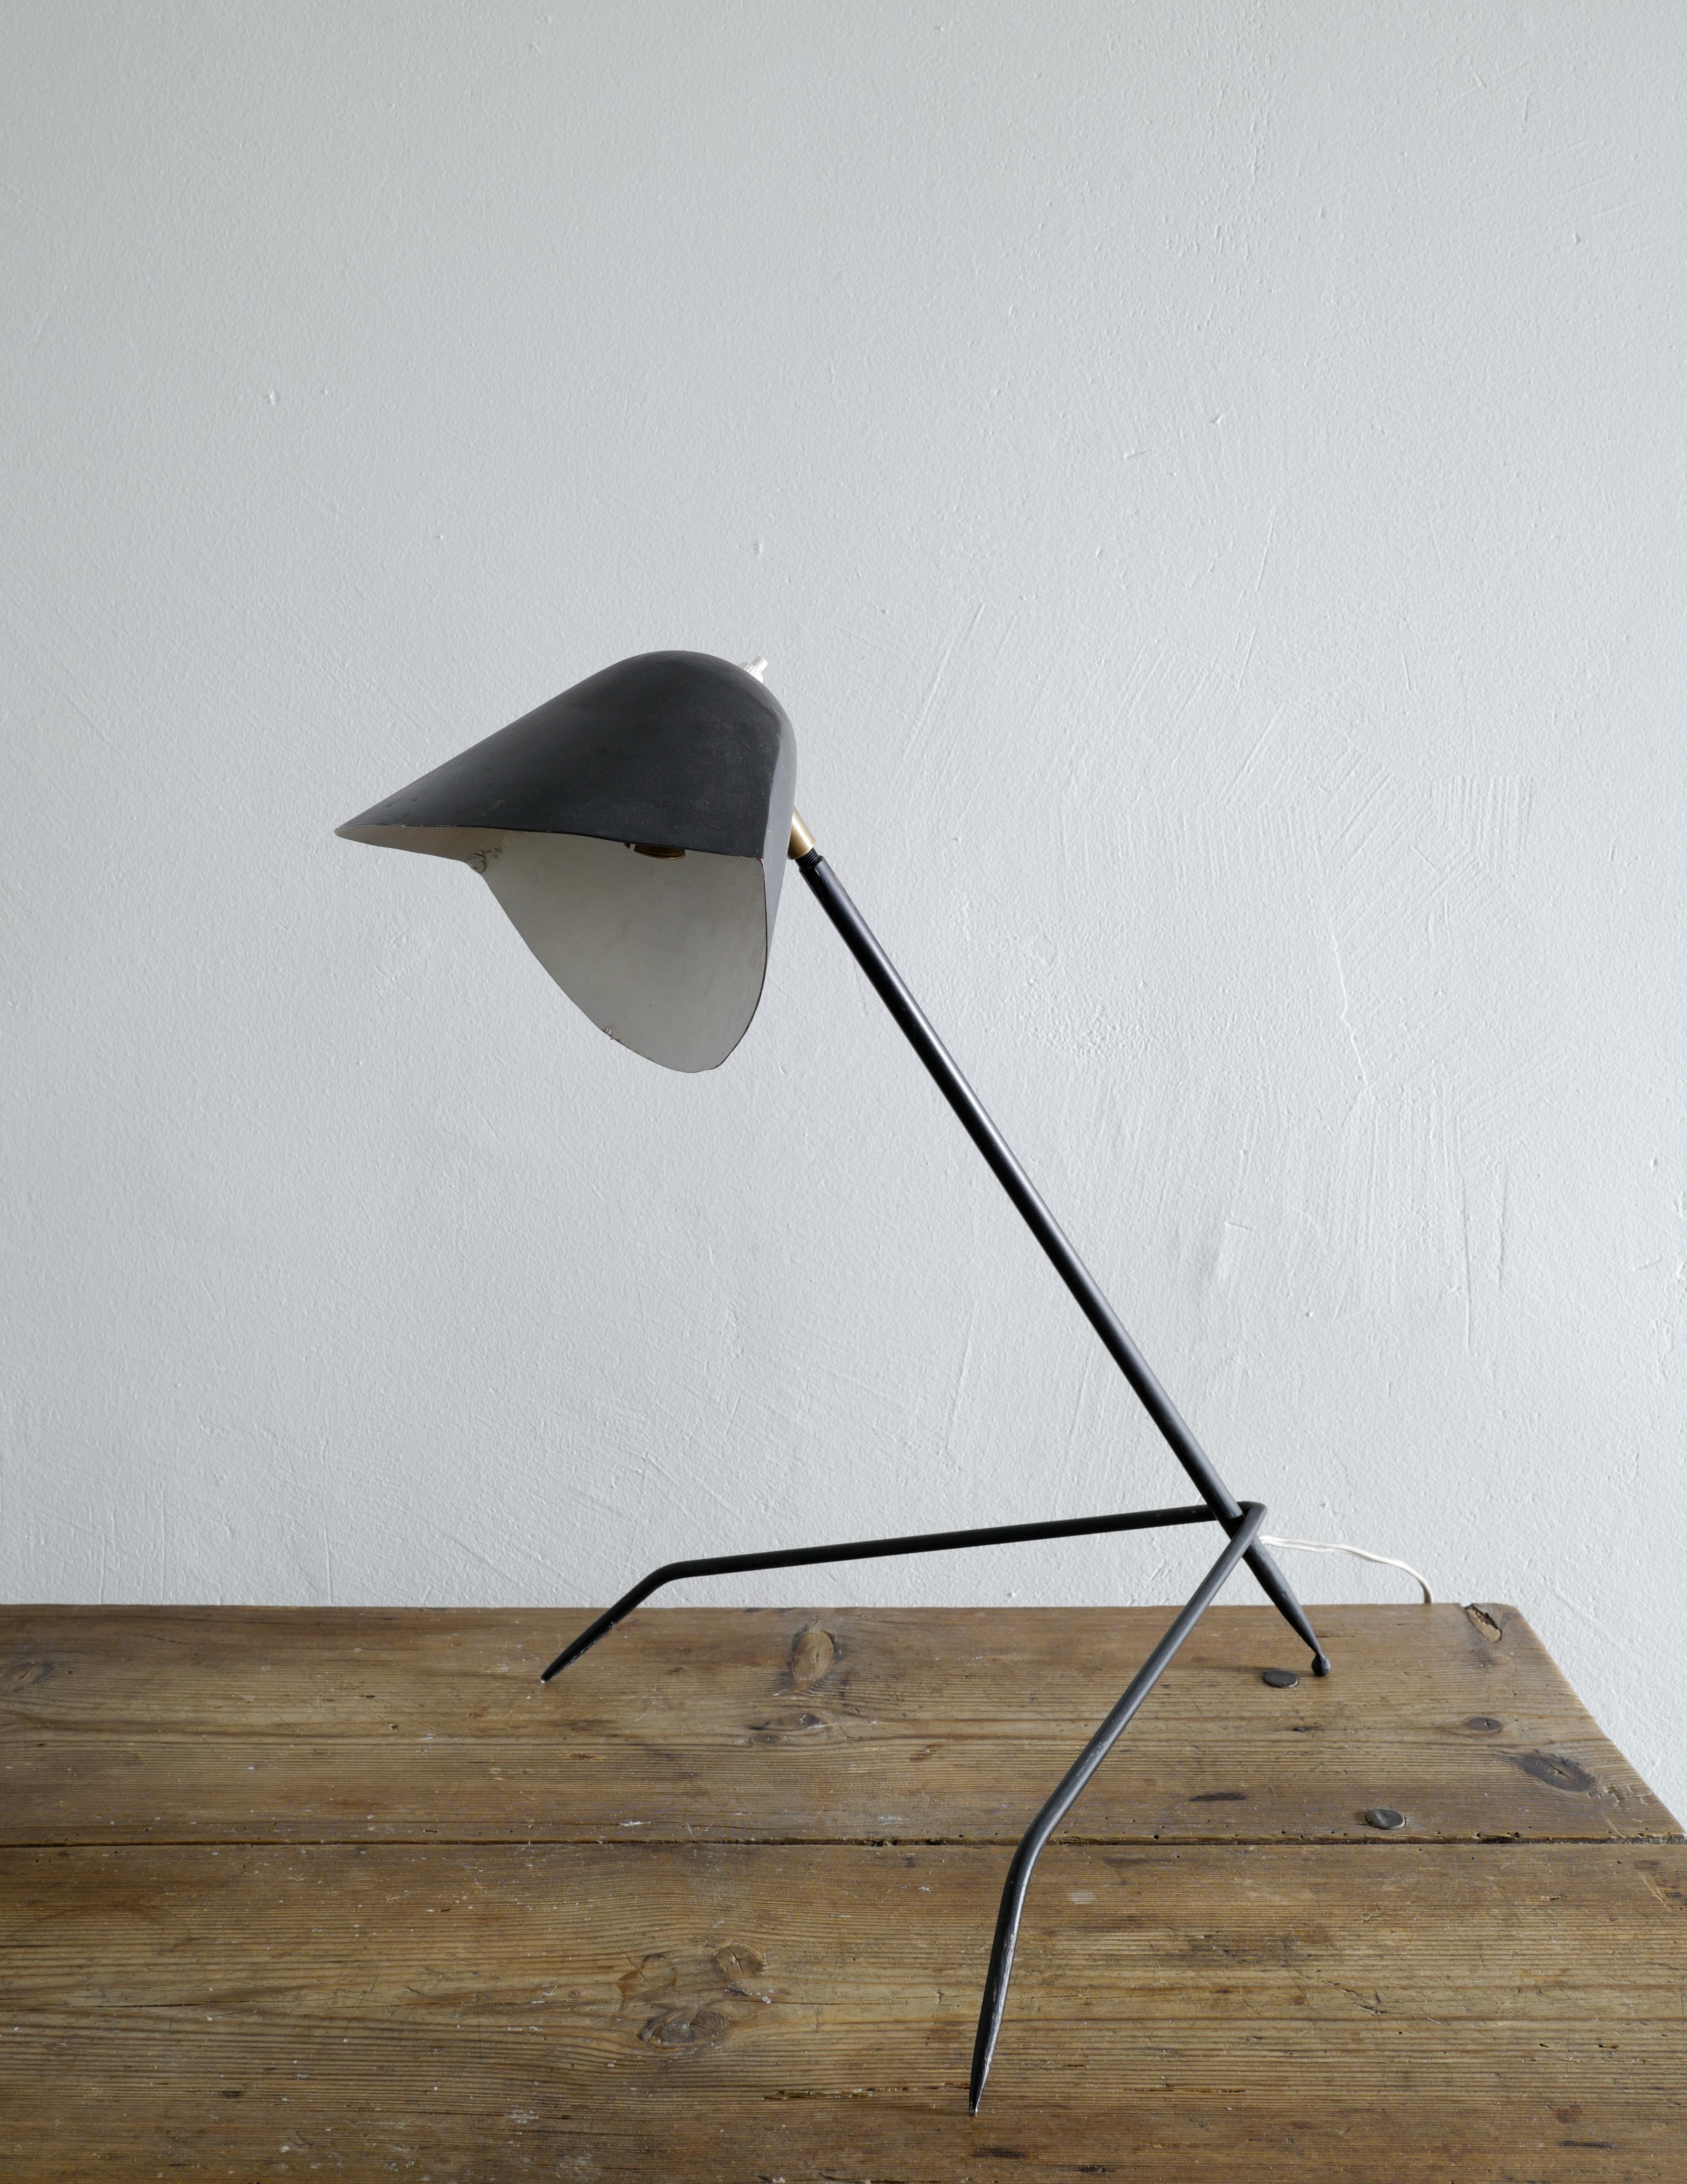 Mid-Century Modern Tripod Desk Table Lamp in Style of Serge Mouille Produced in France, 1950s